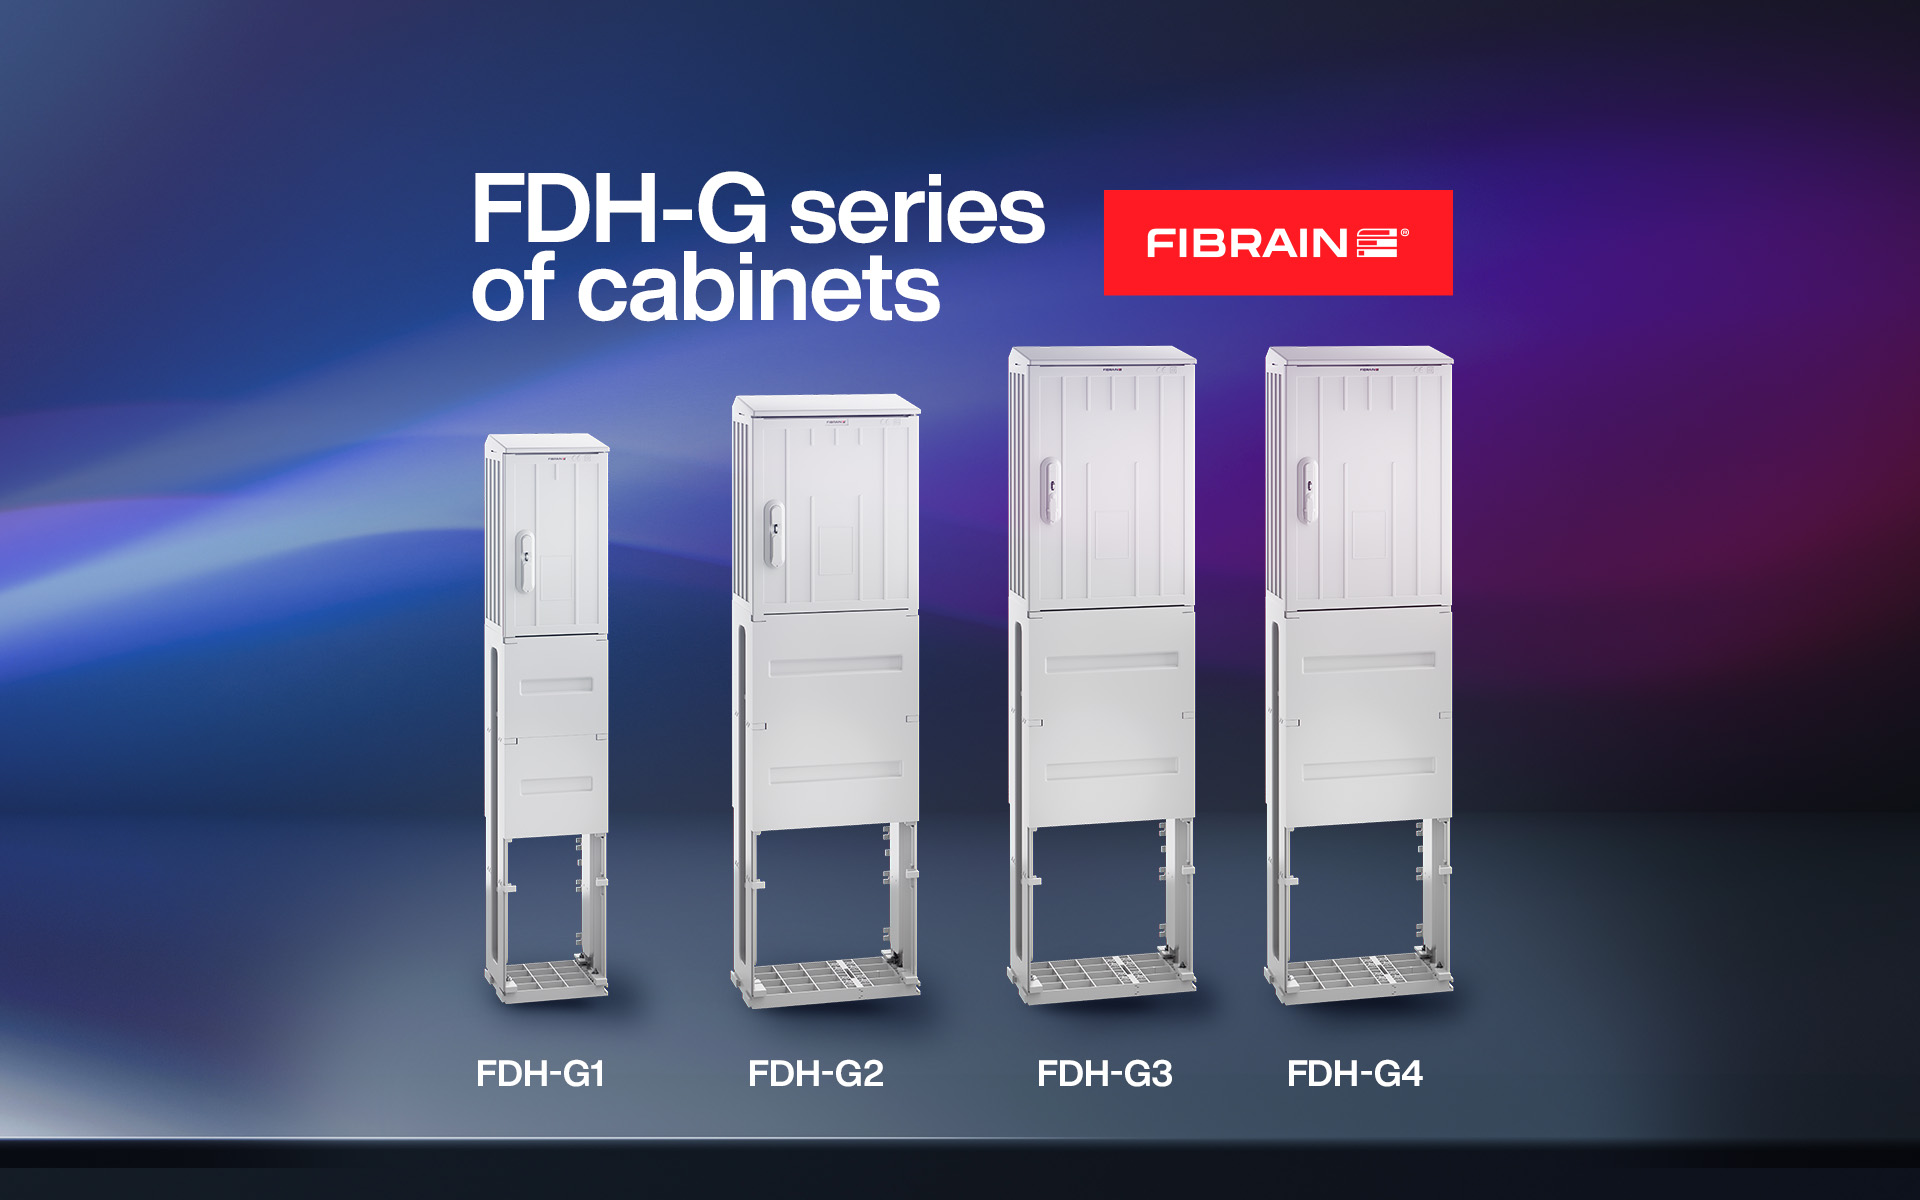 New cabinets compliment FDH-G series!